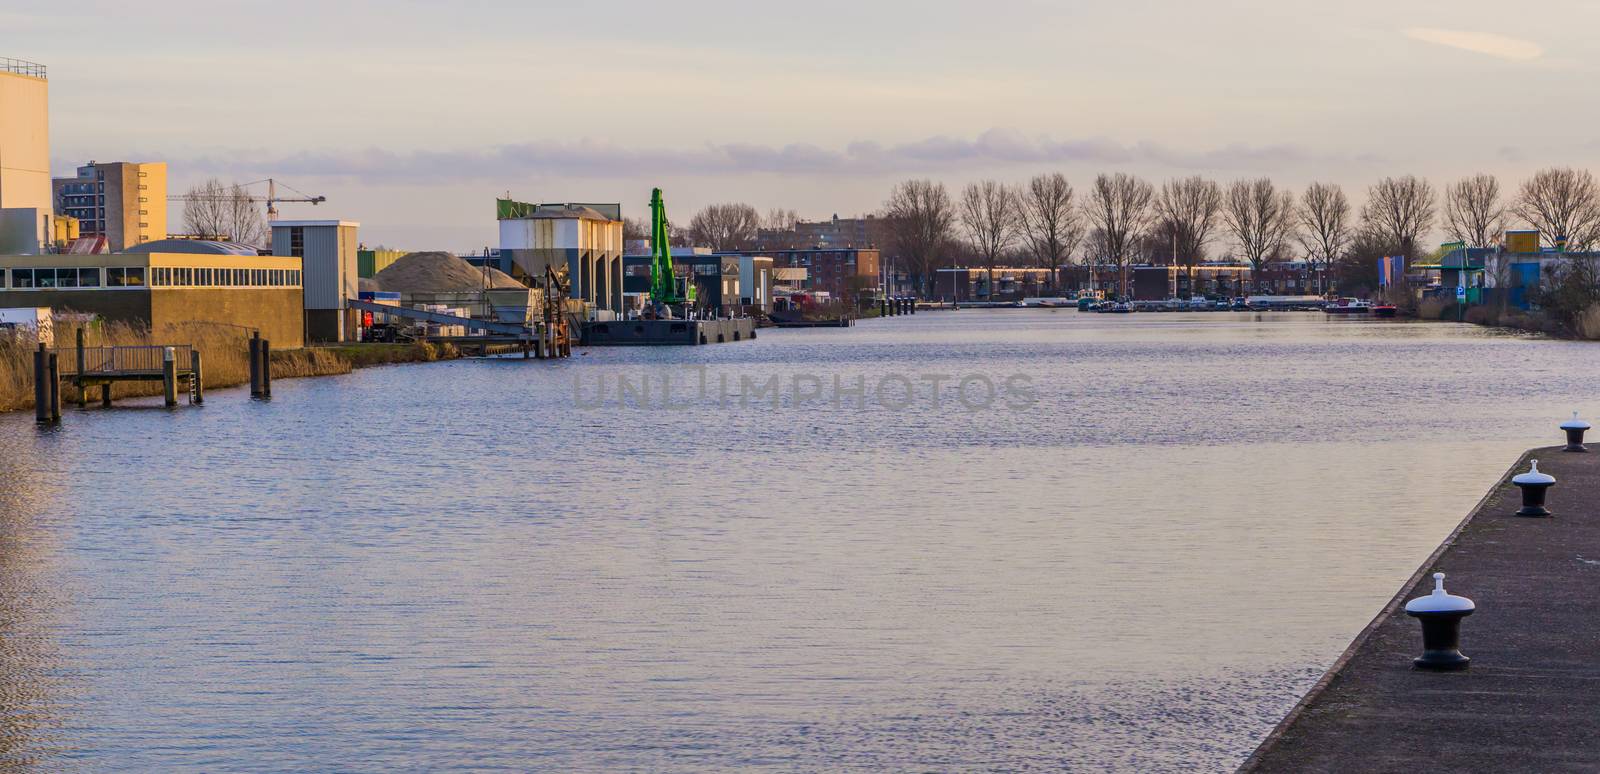 Industrial zone at the water side of Alphen aan den Rijn, The Netherlands, city scenery of a well known dutch city by charlottebleijenberg